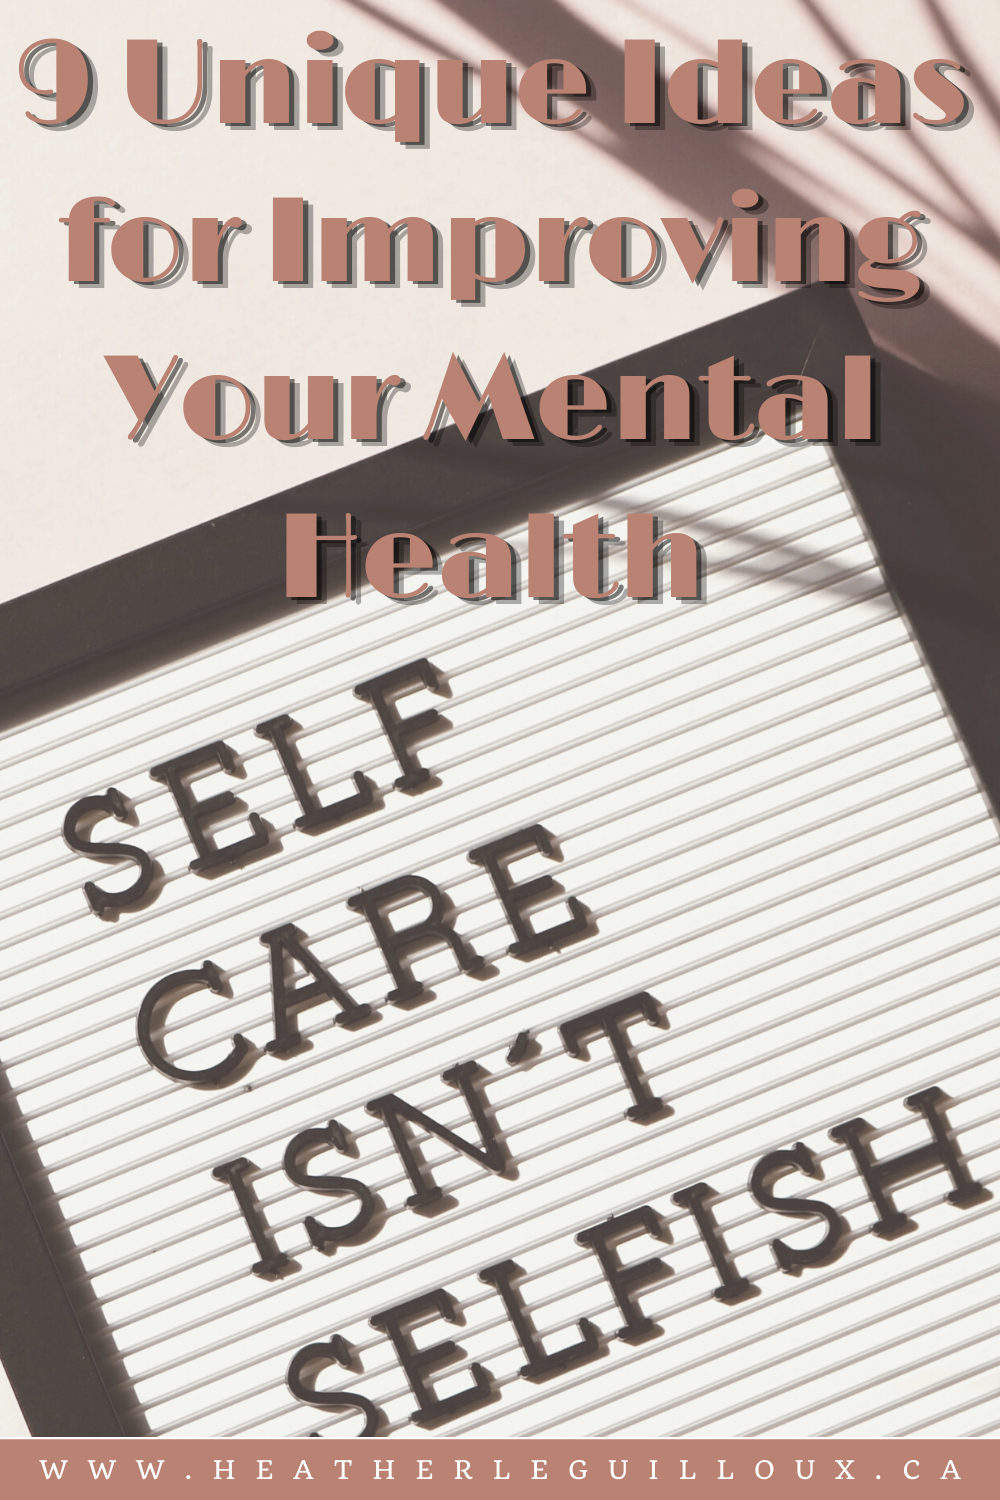 As our lives constantly become busier, we strive to look for ways to improve our mental health. All of us are different, however, which means each of our lives calls for different solutions. #mentalhealth #ideas #selfcare